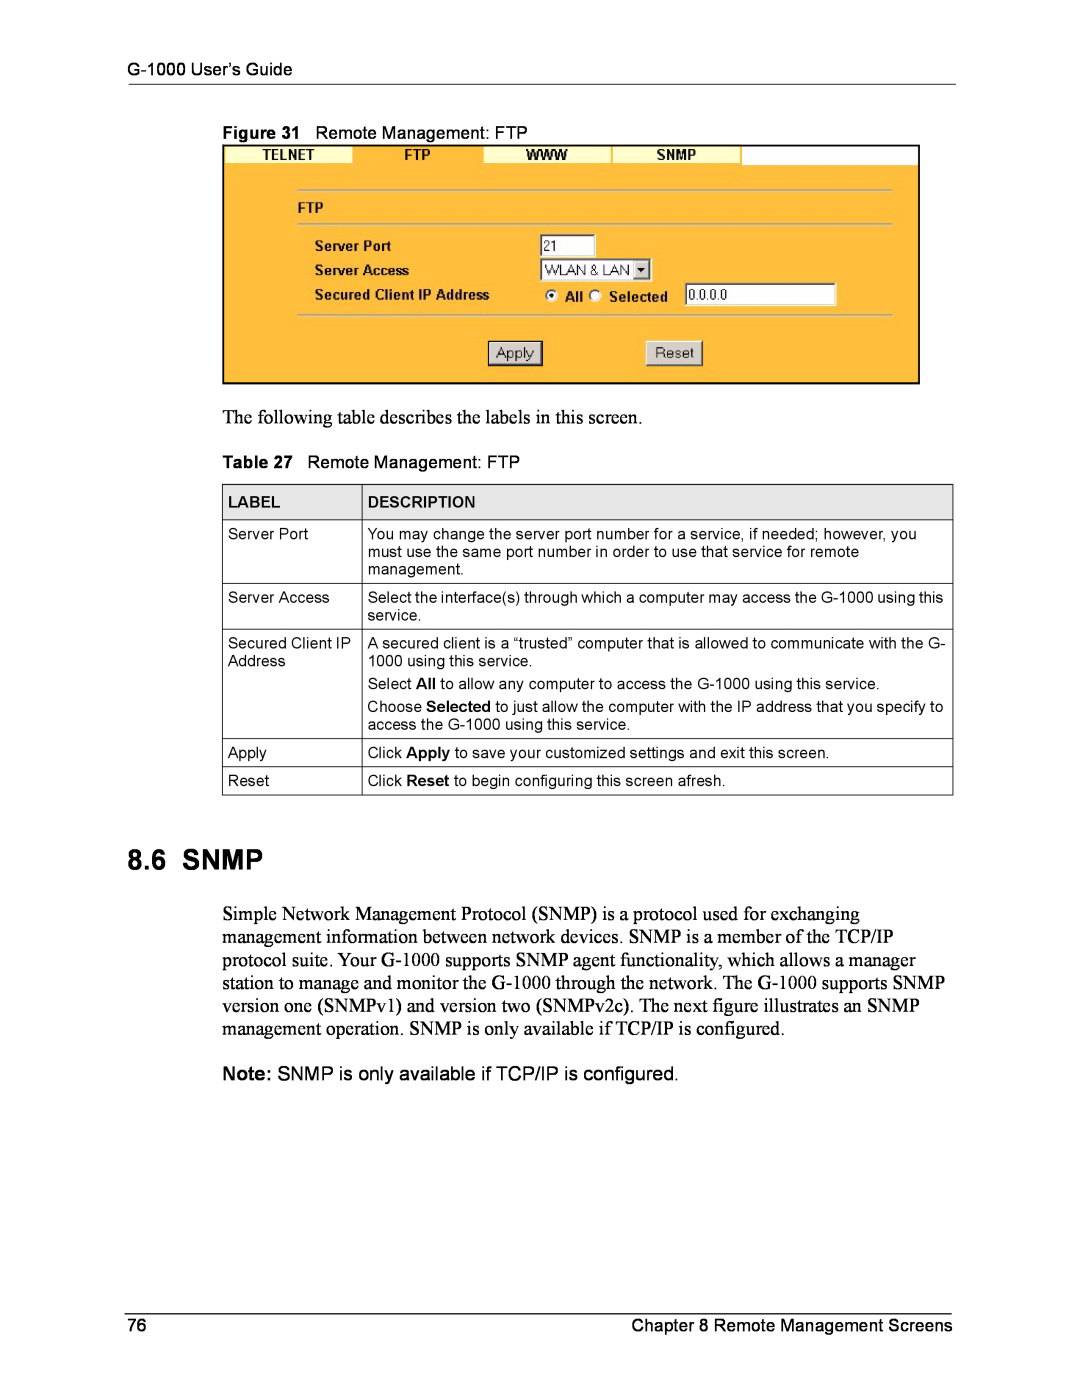 ZyXEL Communications G-1000 manual Snmp, Note SNMP is only available if TCP/IP is configured 